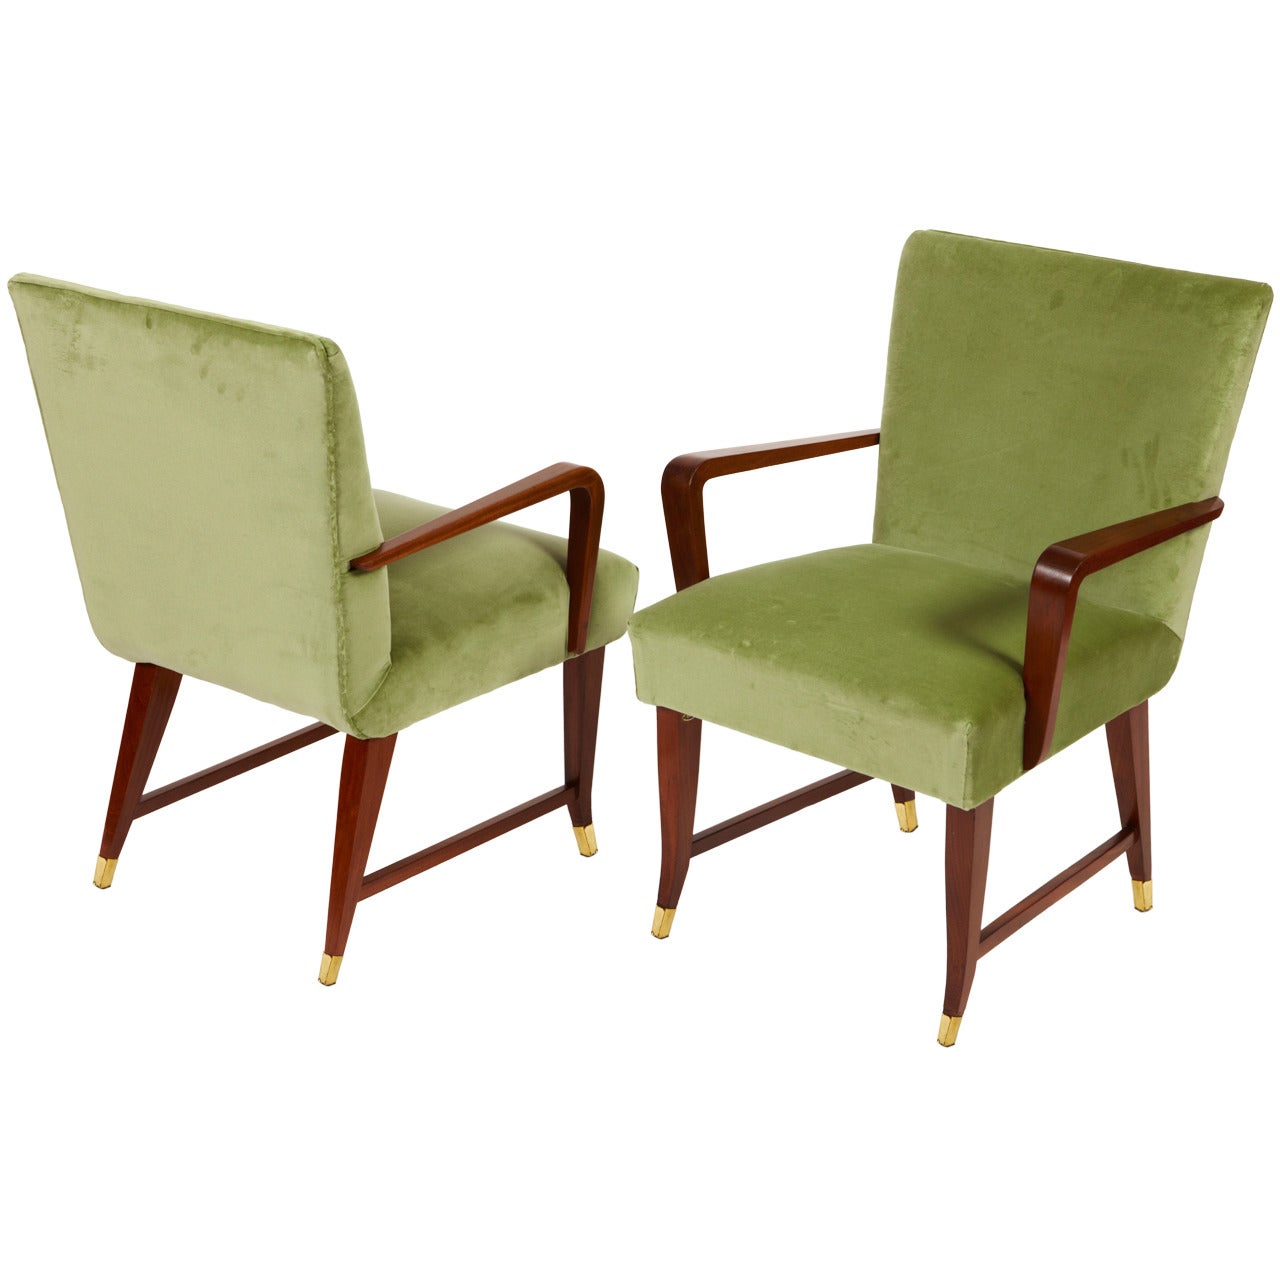 Pair of Important Gio Ponti Armchairs from Bnl of Bergamo (Italy) by Isa